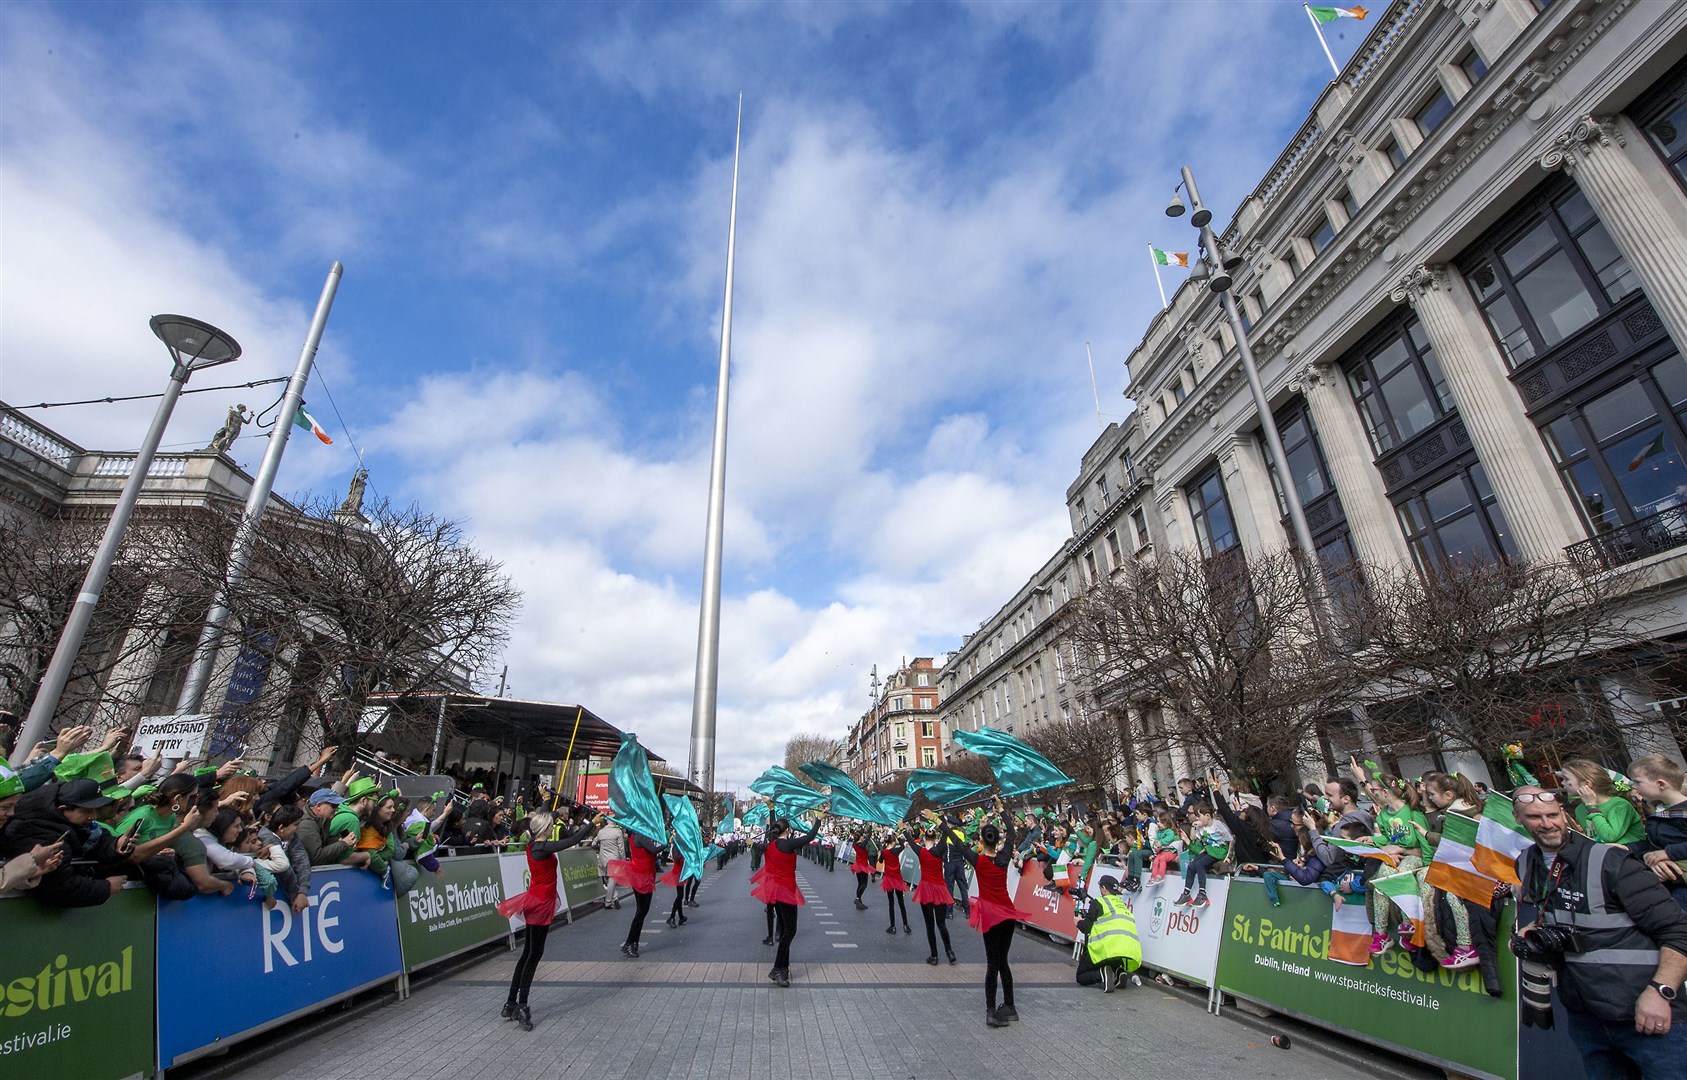 Performers take part in the St Patrick’s Day Parade in Dublin (Michael Chester/PA)